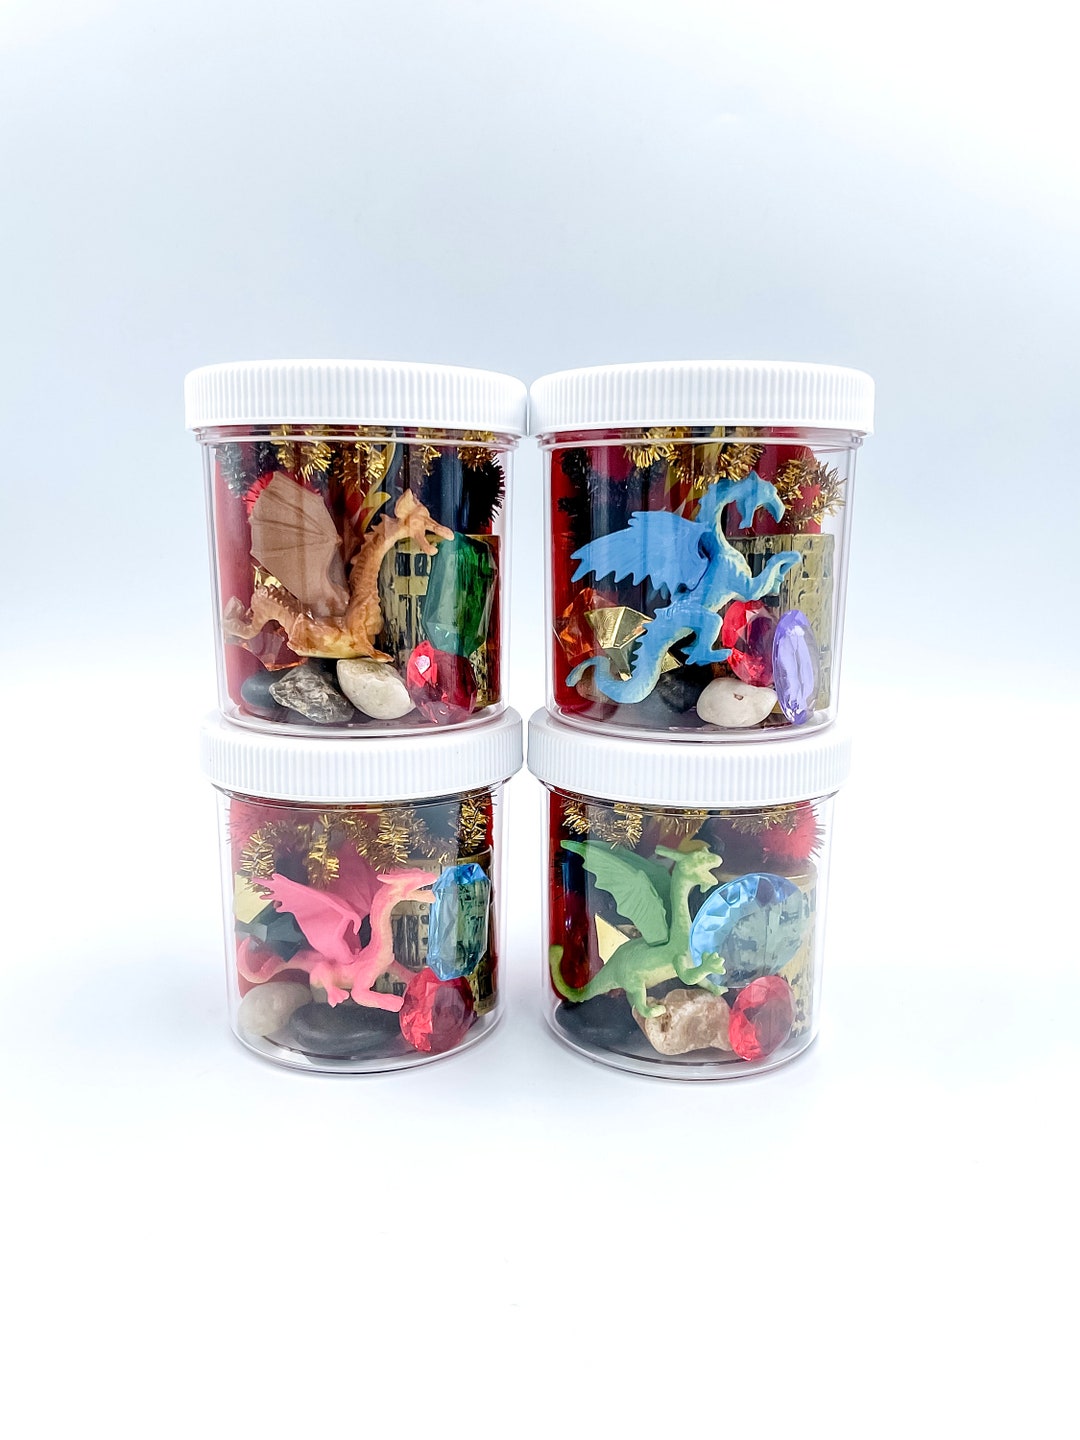 Dragon Play Dough Party Favors, Mythical Play Doh Sensory Jars, Kids  Birthday Gift, Class Goodie Bags, Homemade Play Dough 